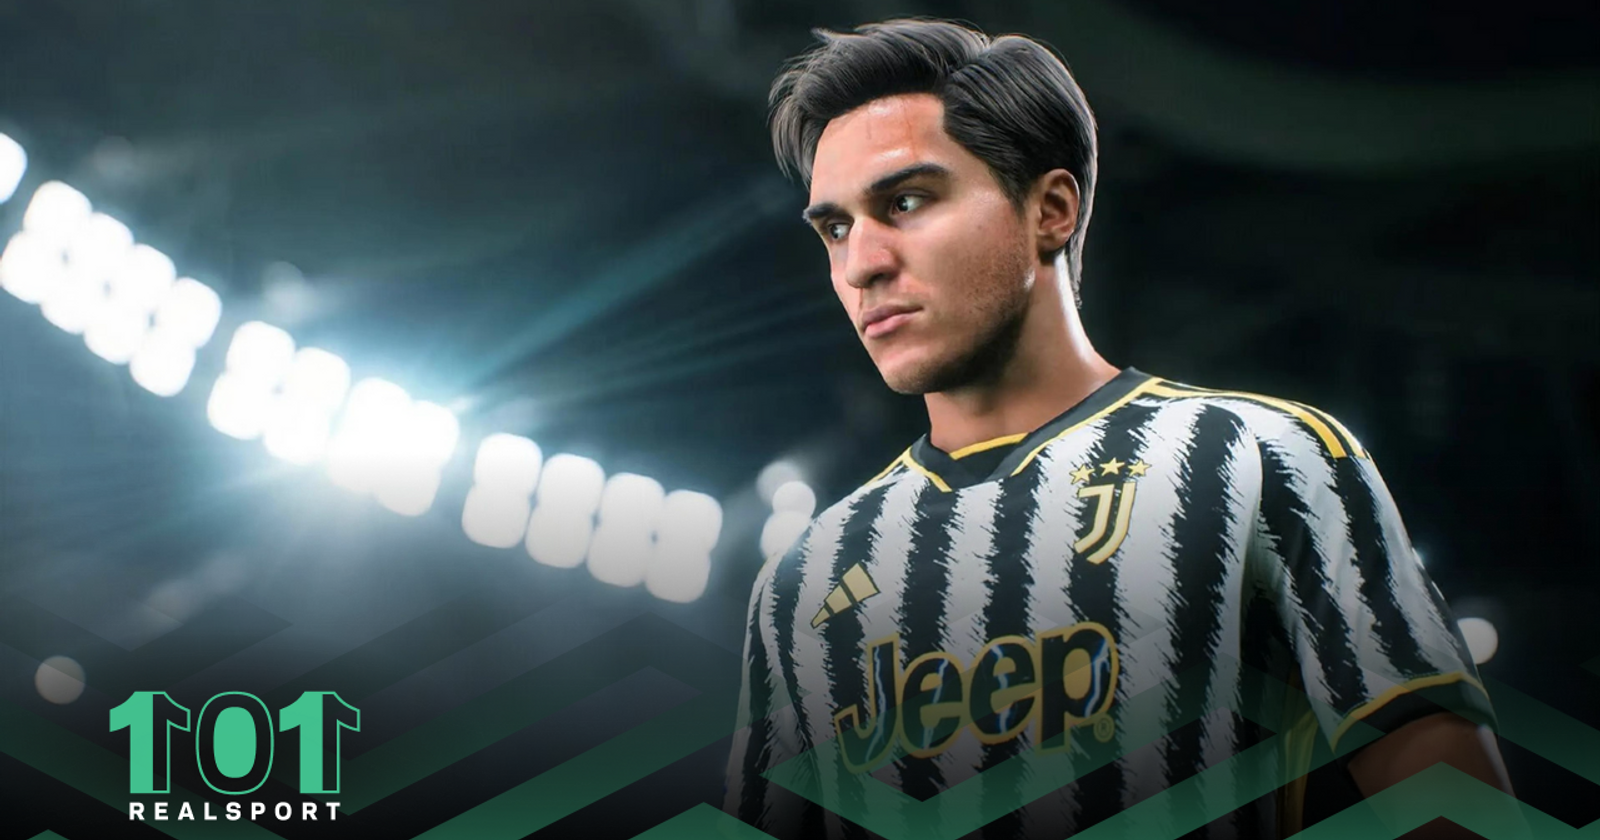 FIFA 23: Player Career Progression Needs To Be Fixed For EA Sports FC